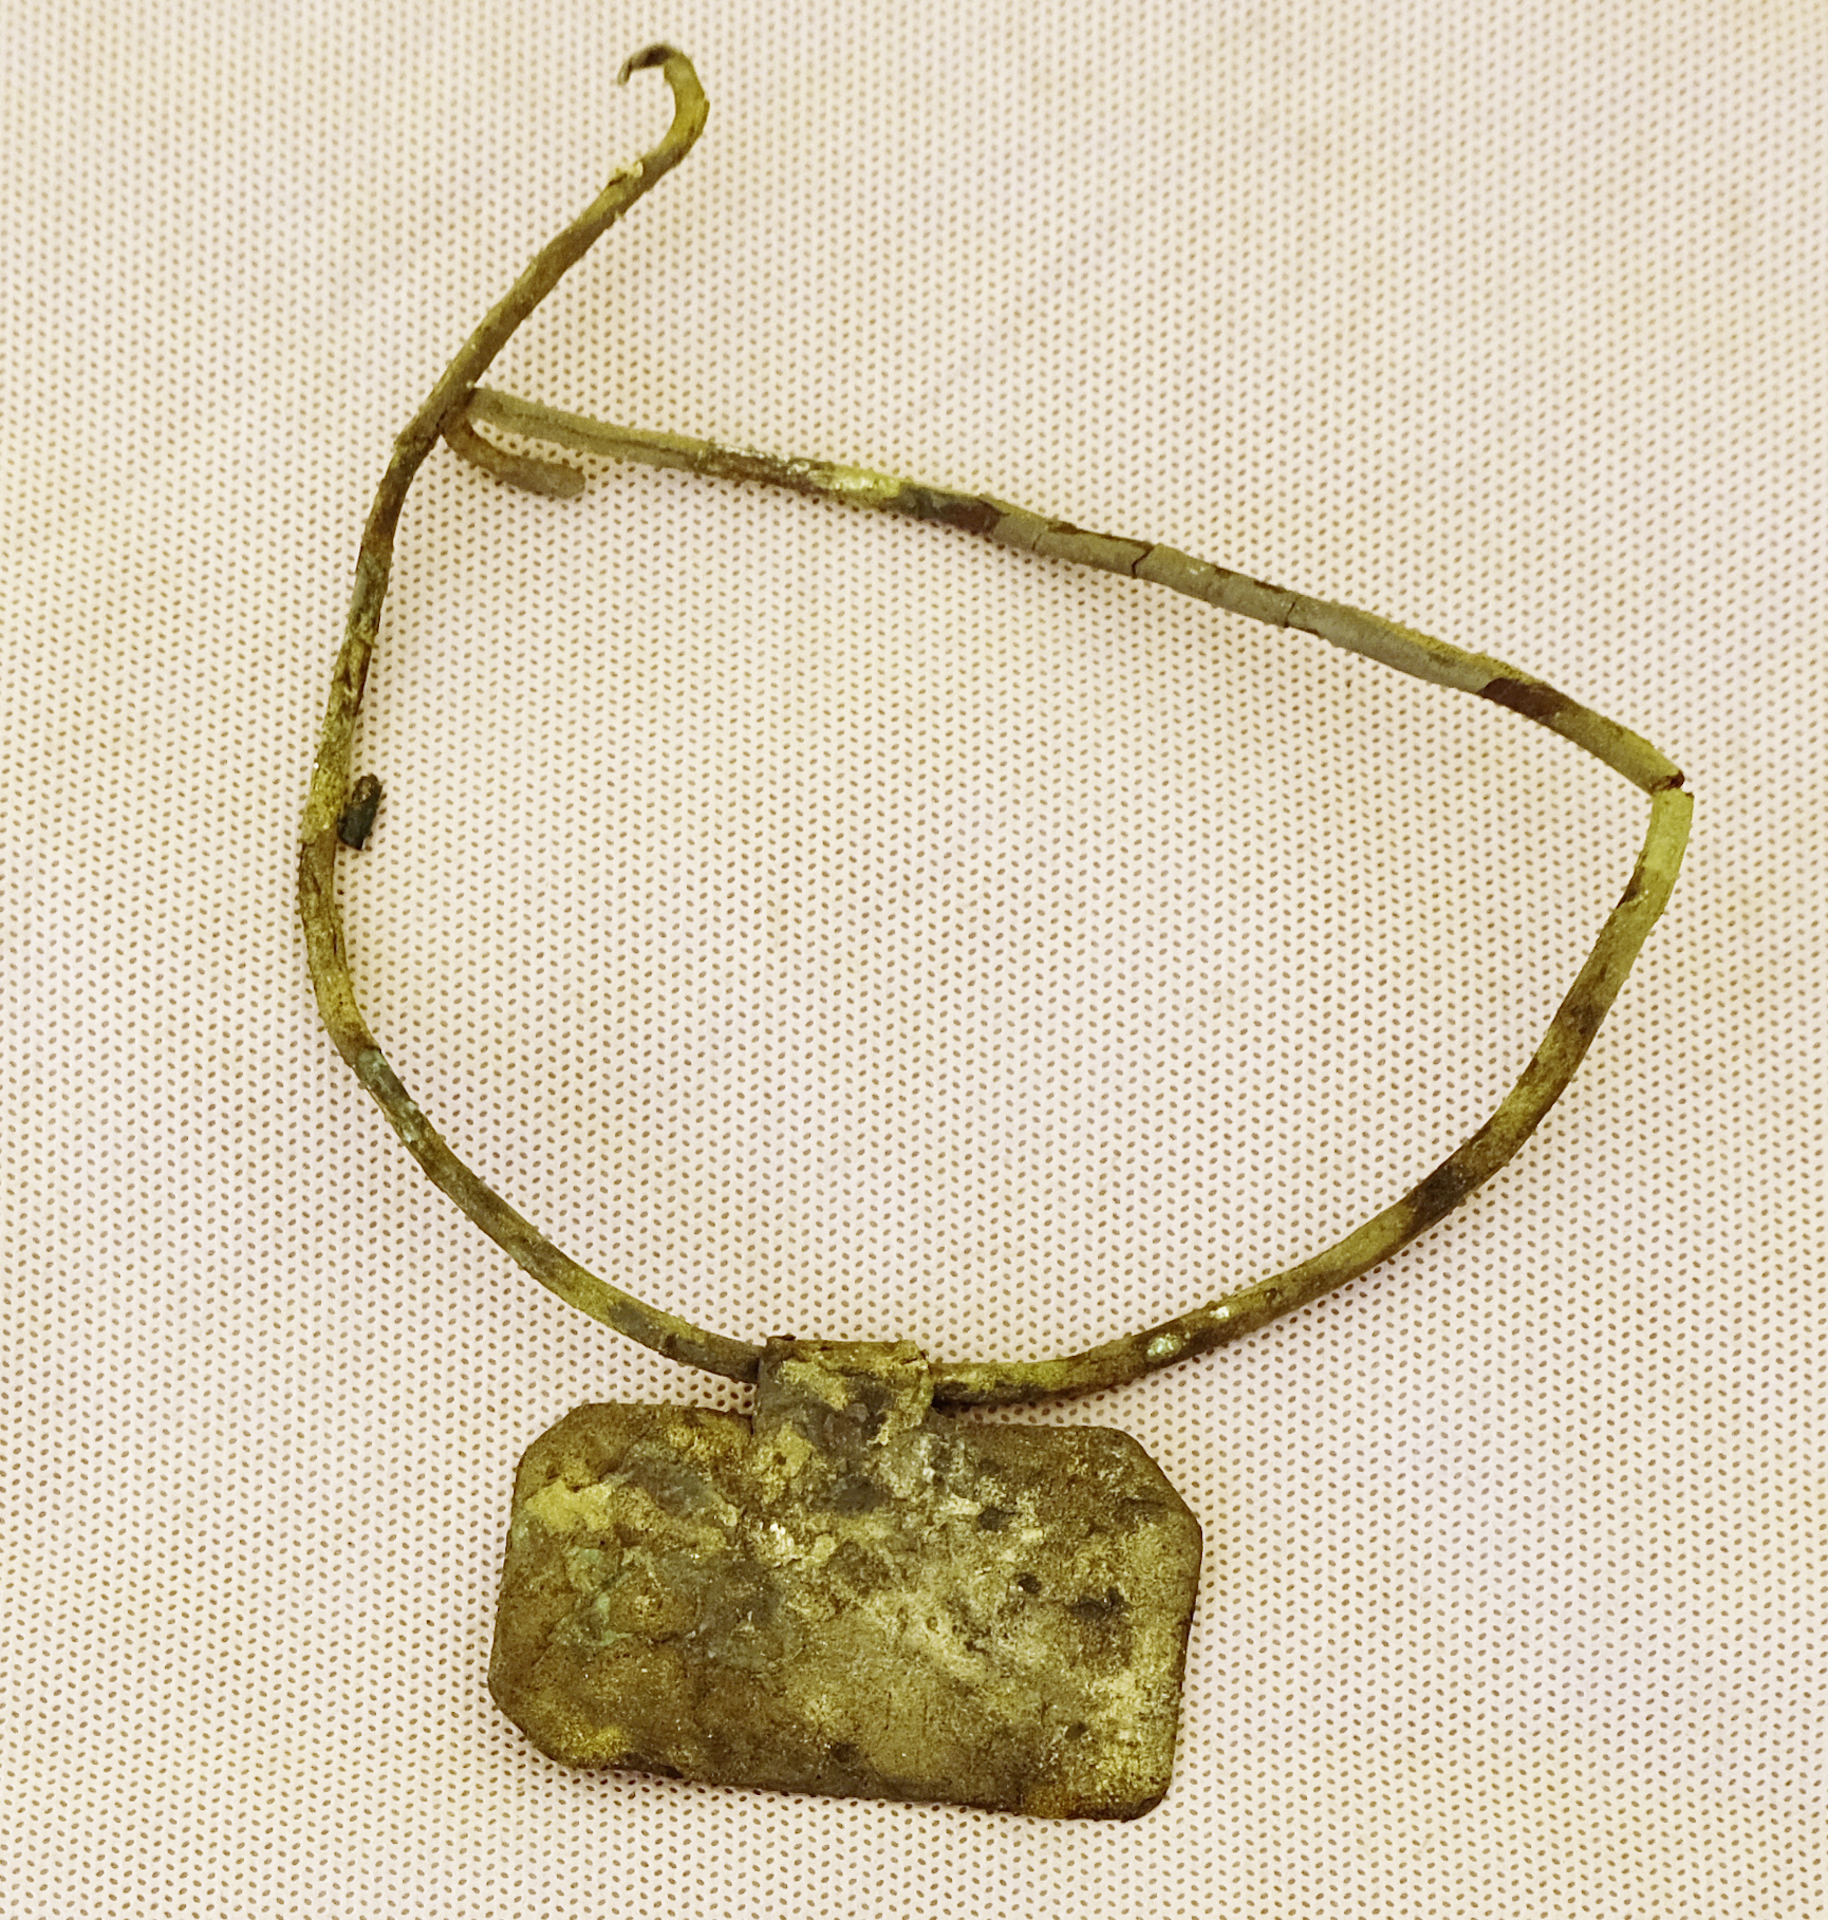 The archaeologists discovered a copper necklace with the inscription 